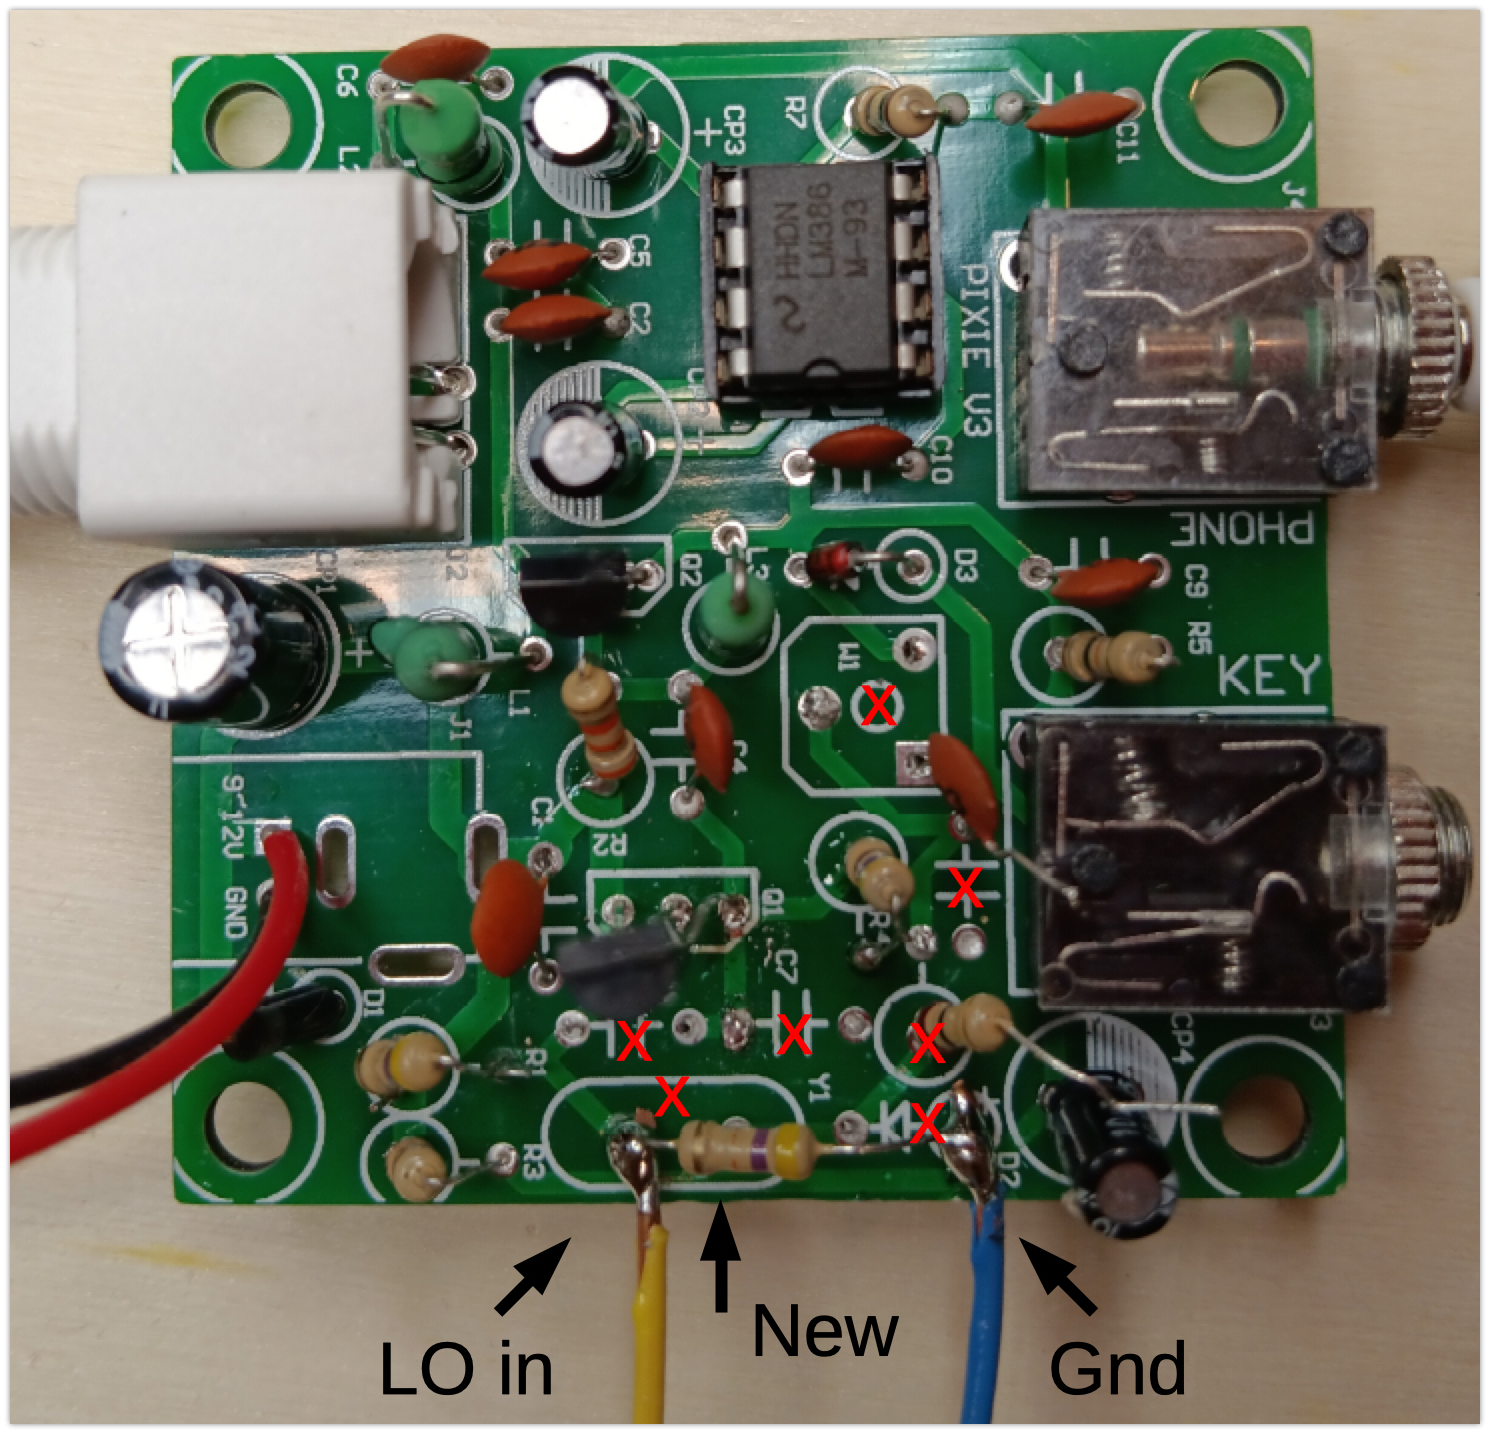 Photo of the modified Pixie board, showing seven components that were removed (two were half-removed), one new resistor, and the wires for LO in and ground from th